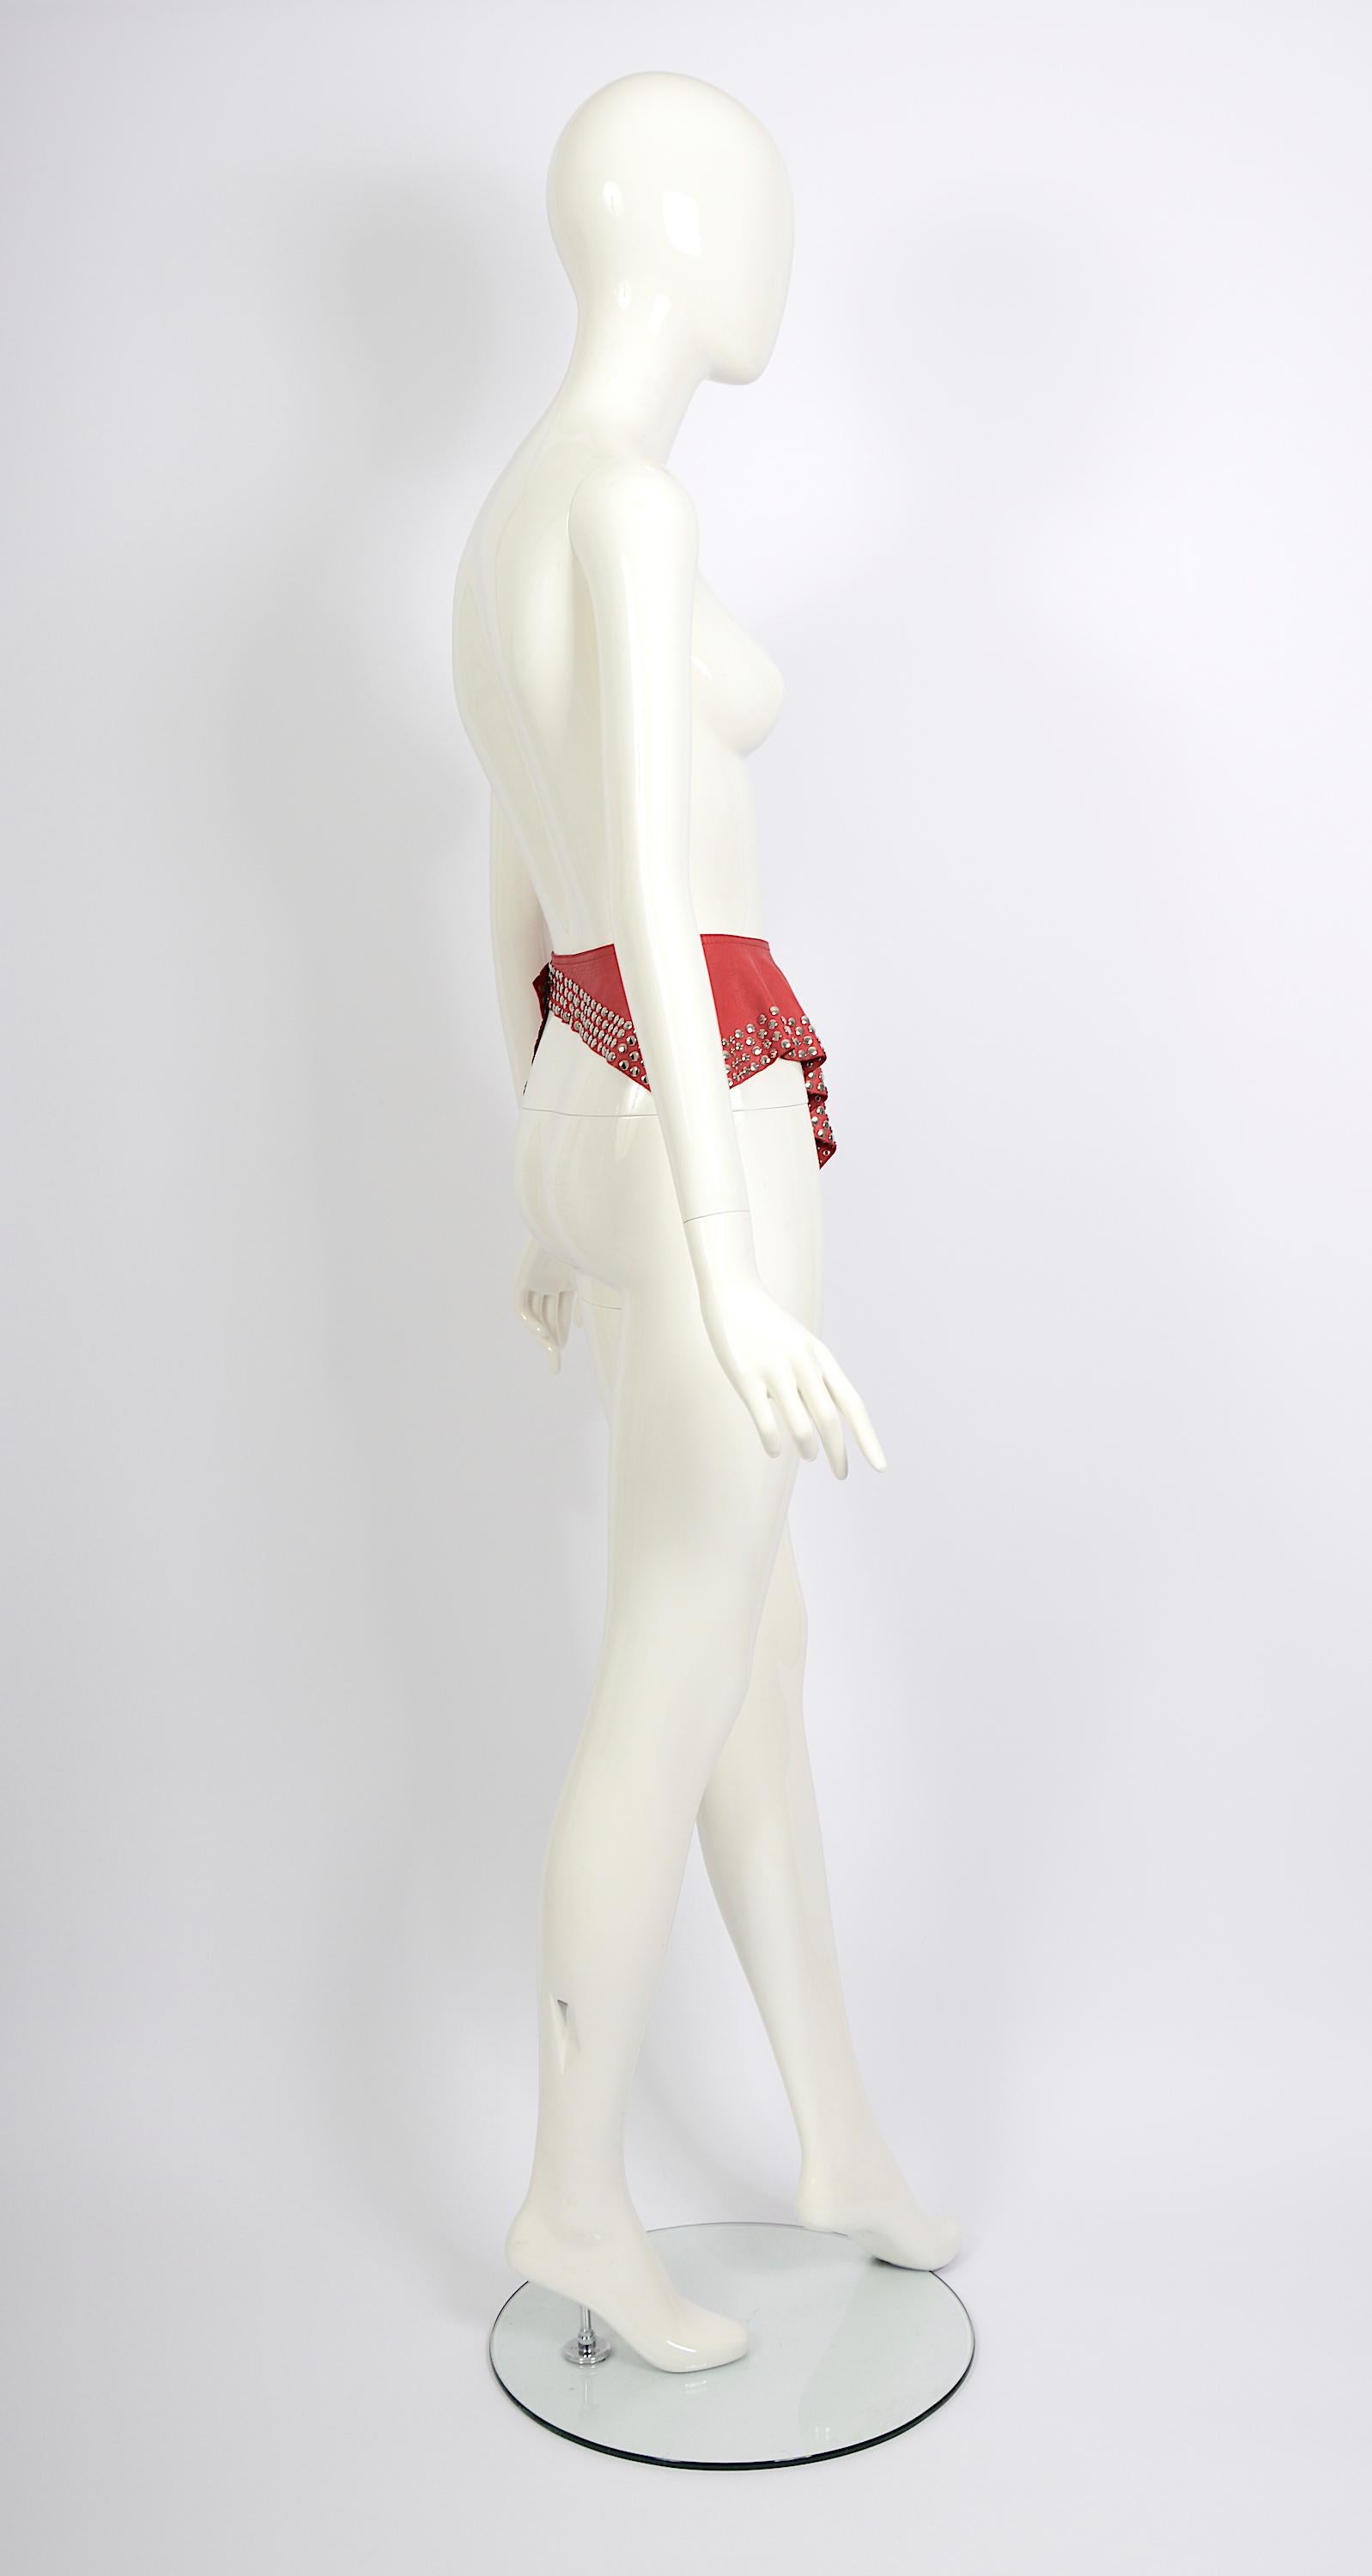 Azzedine Alaia circa 1981 collectionneurs Studded embellished red leather belt skirt en vente 1